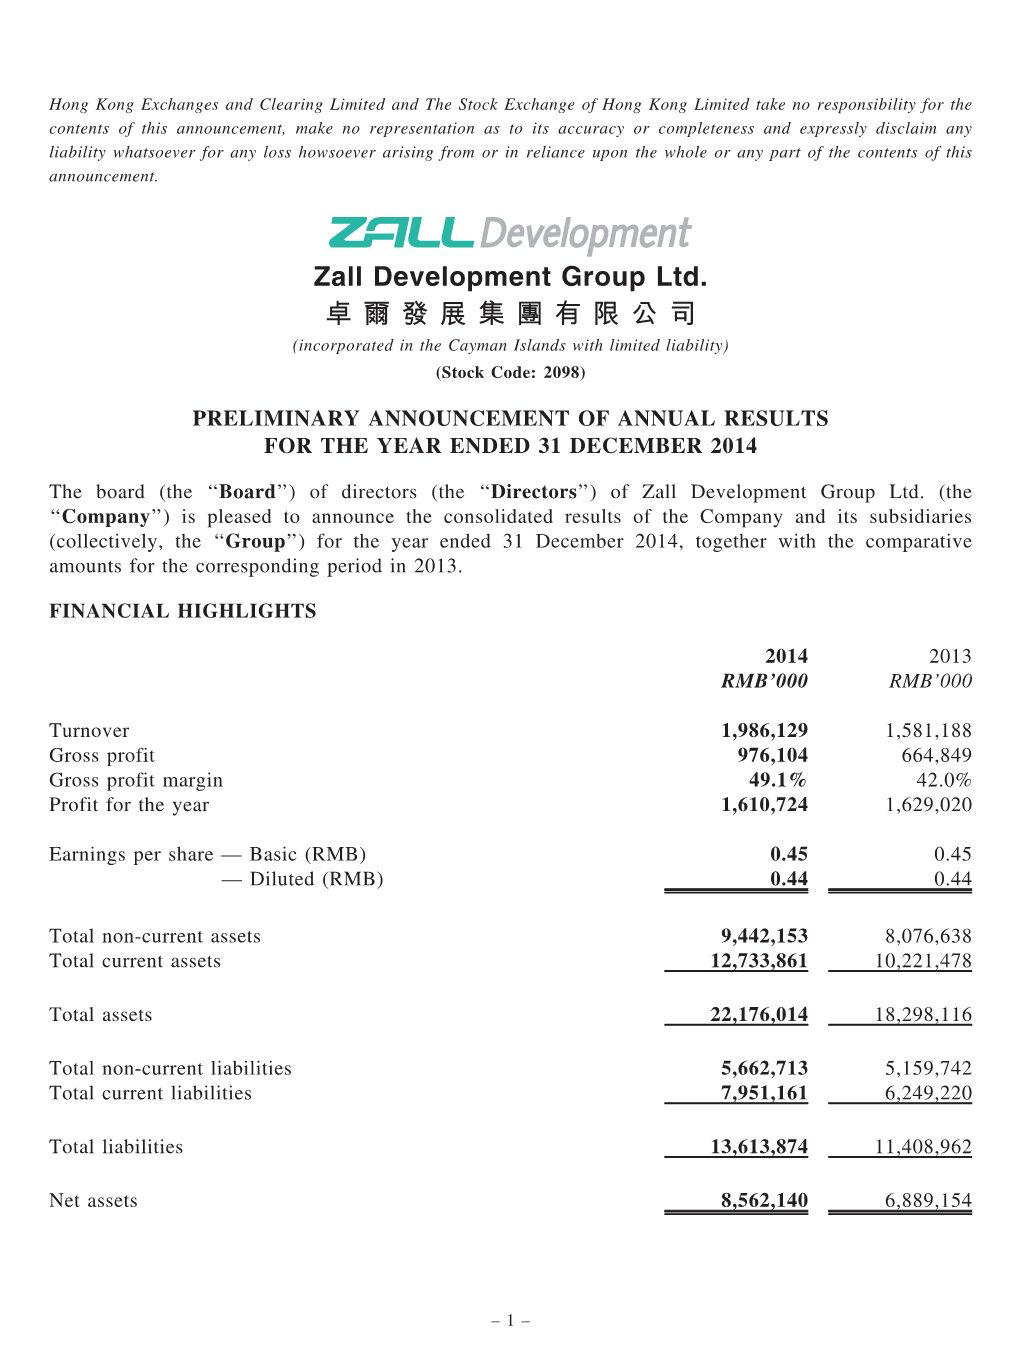 Zall Development Group Ltd. 卓 爾 發 展 集 團 有 限 公 司 (Incorporated in the Cayman Islands with Limited Liability) (Stock Code: 2098)